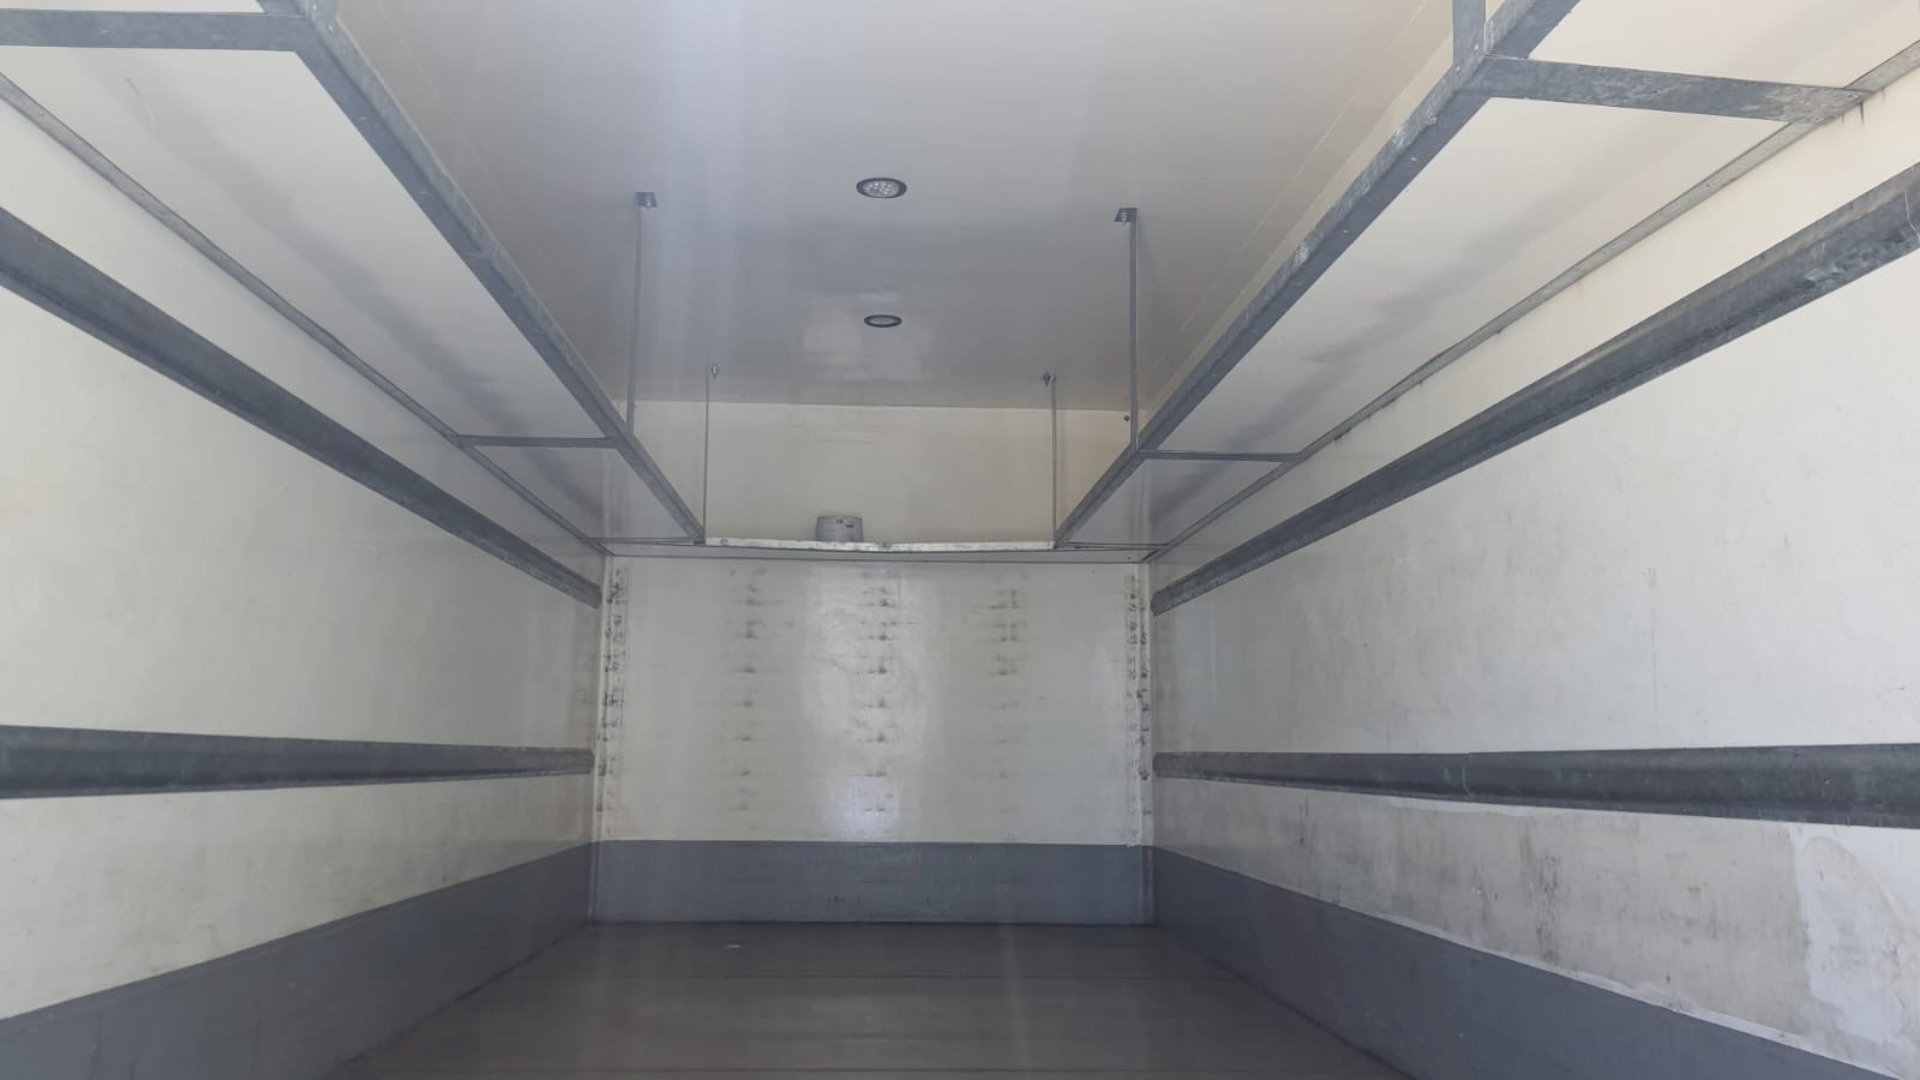 UD Box trucks 2022 UD Kuzer RKE150 MT Bread Box & NoseCone 2022 for sale by UD Trucks Cape Town | Truck & Trailer Marketplace